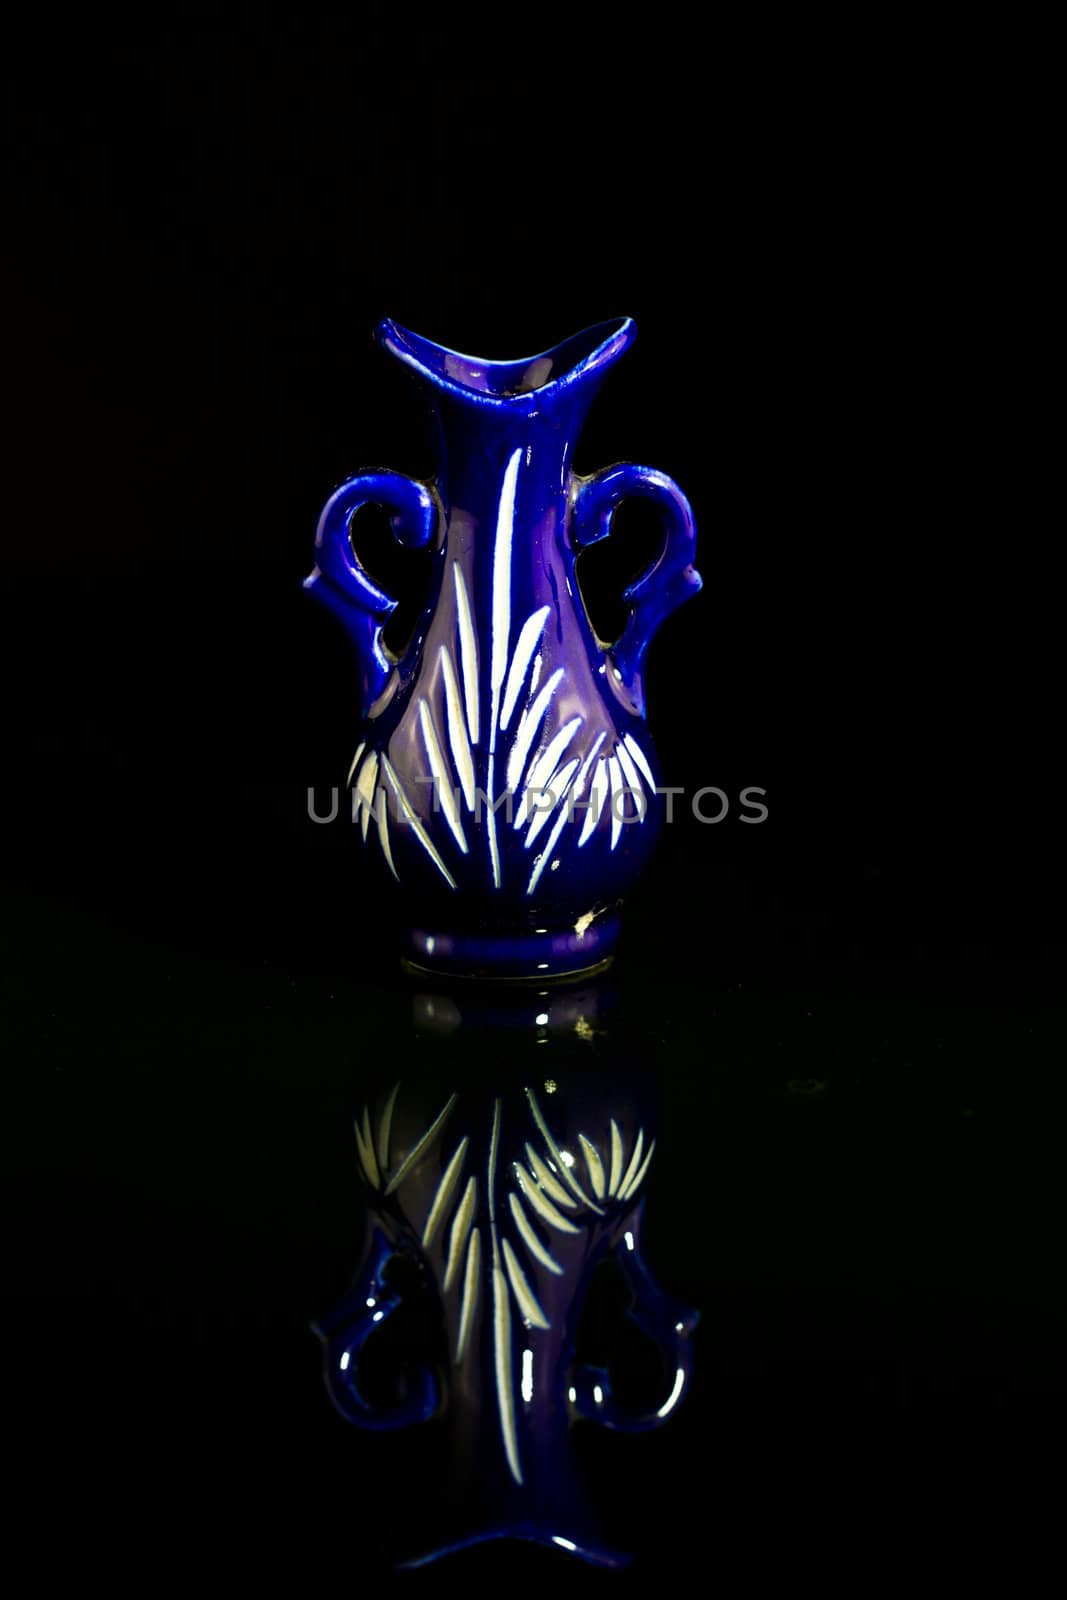 A blue empty vase on a mirror with black background and mirror image in portrait orientation